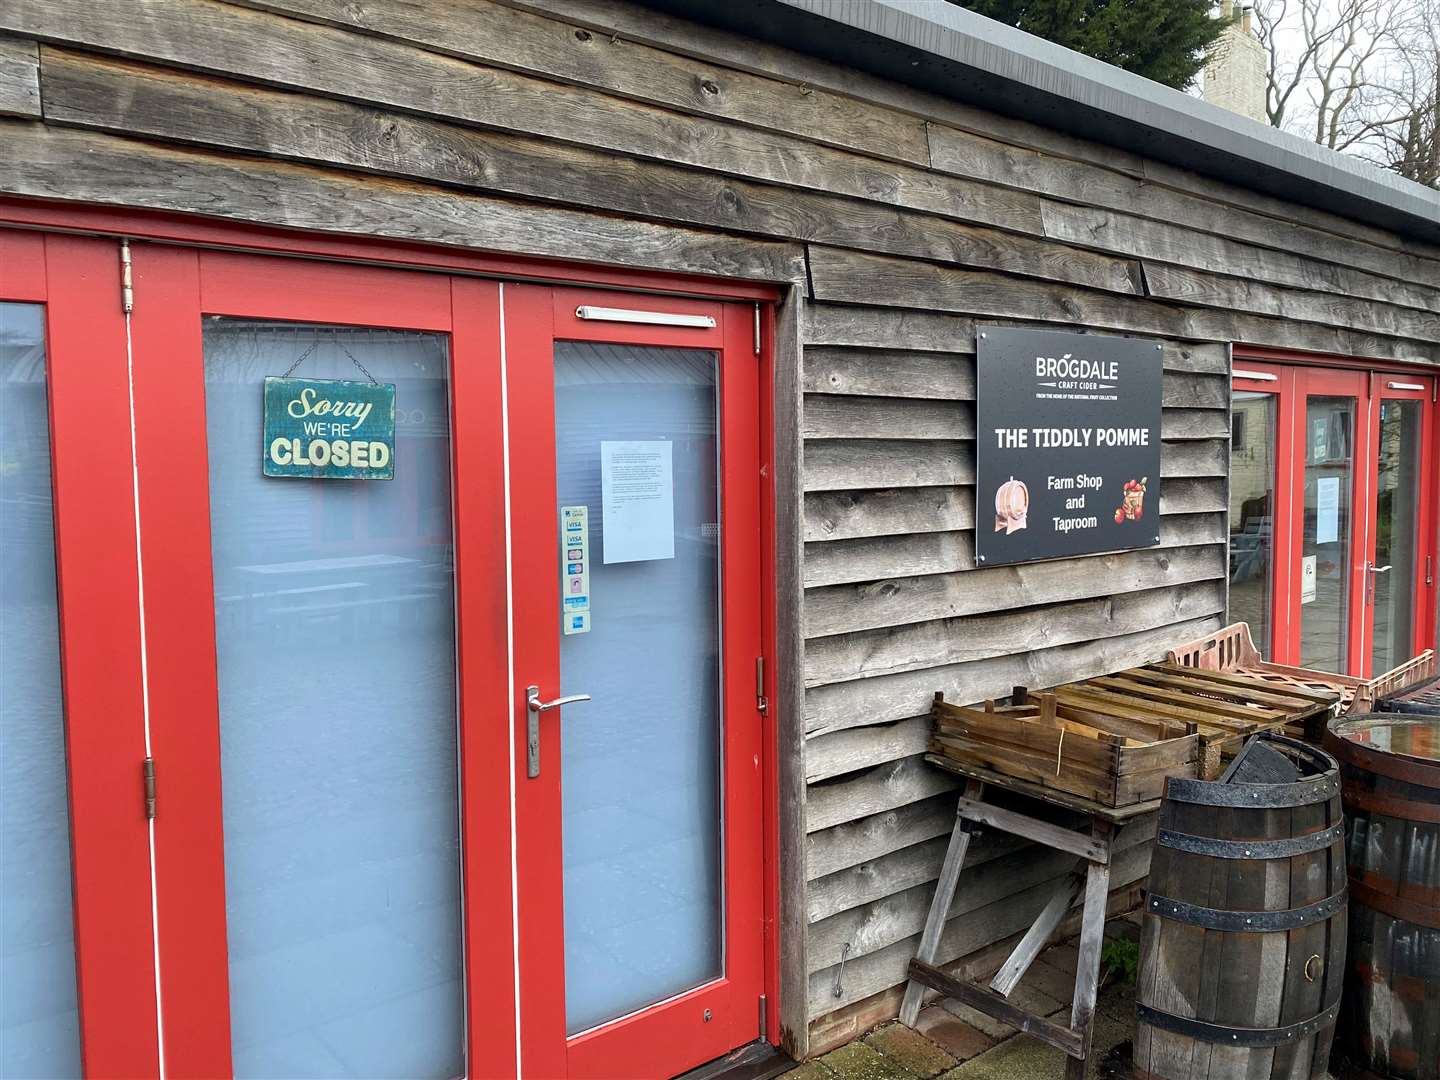 The Tiddly Pomme at Brogdale Farm, Faversham, has closed